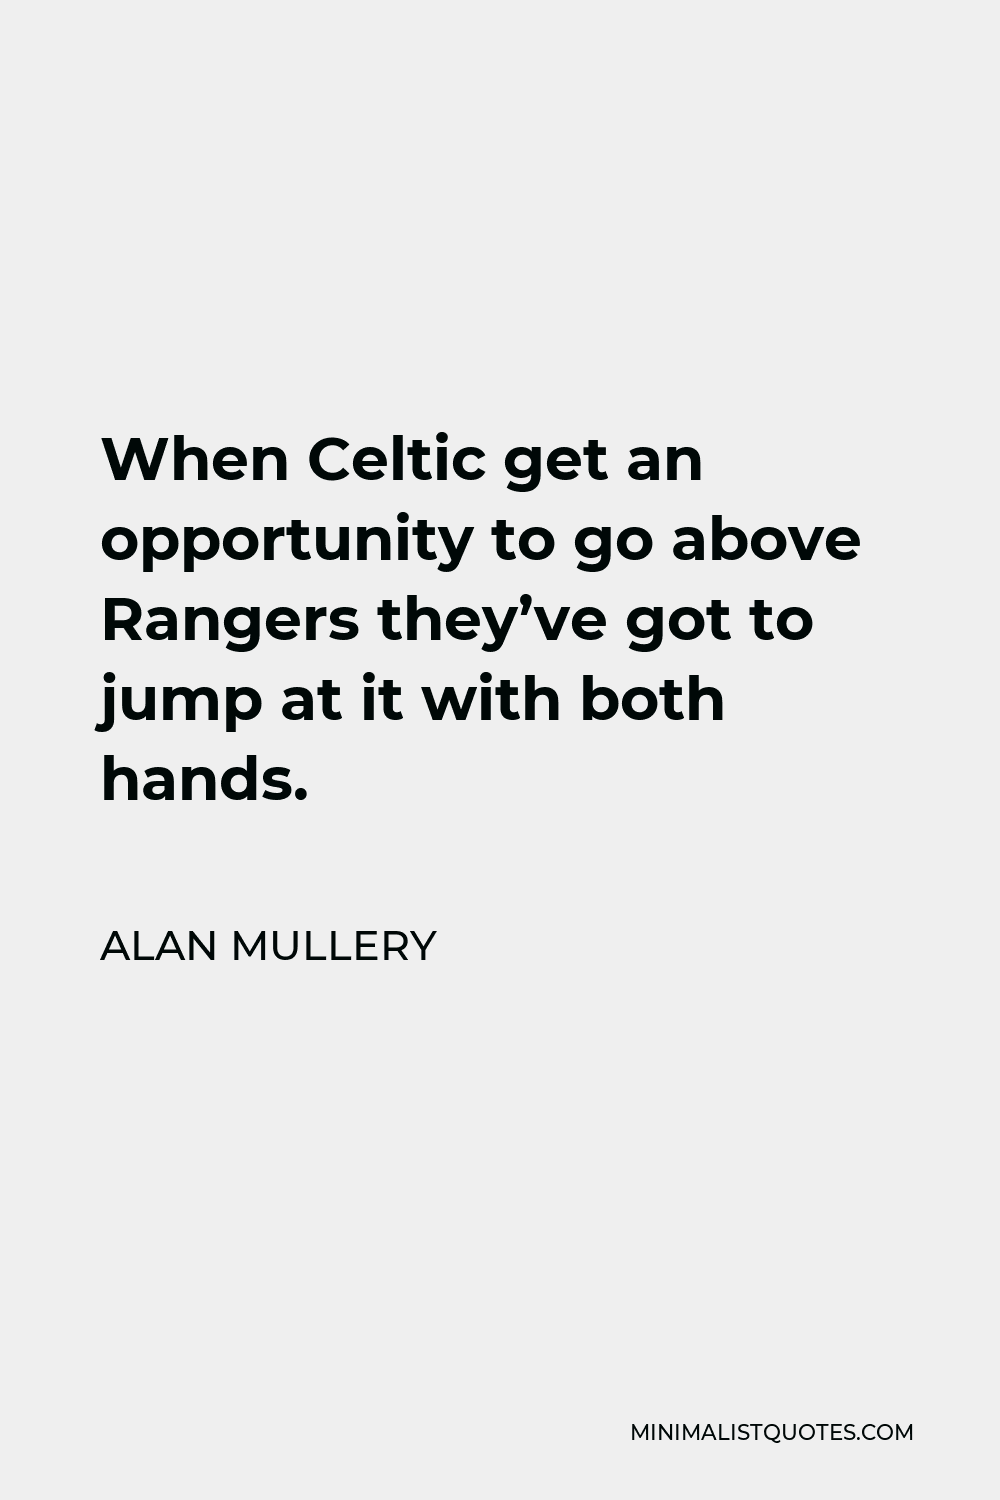 Alan Mullery Quote - When Celtic get an opportunity to go above Rangers they’ve got to jump at it with both hands.